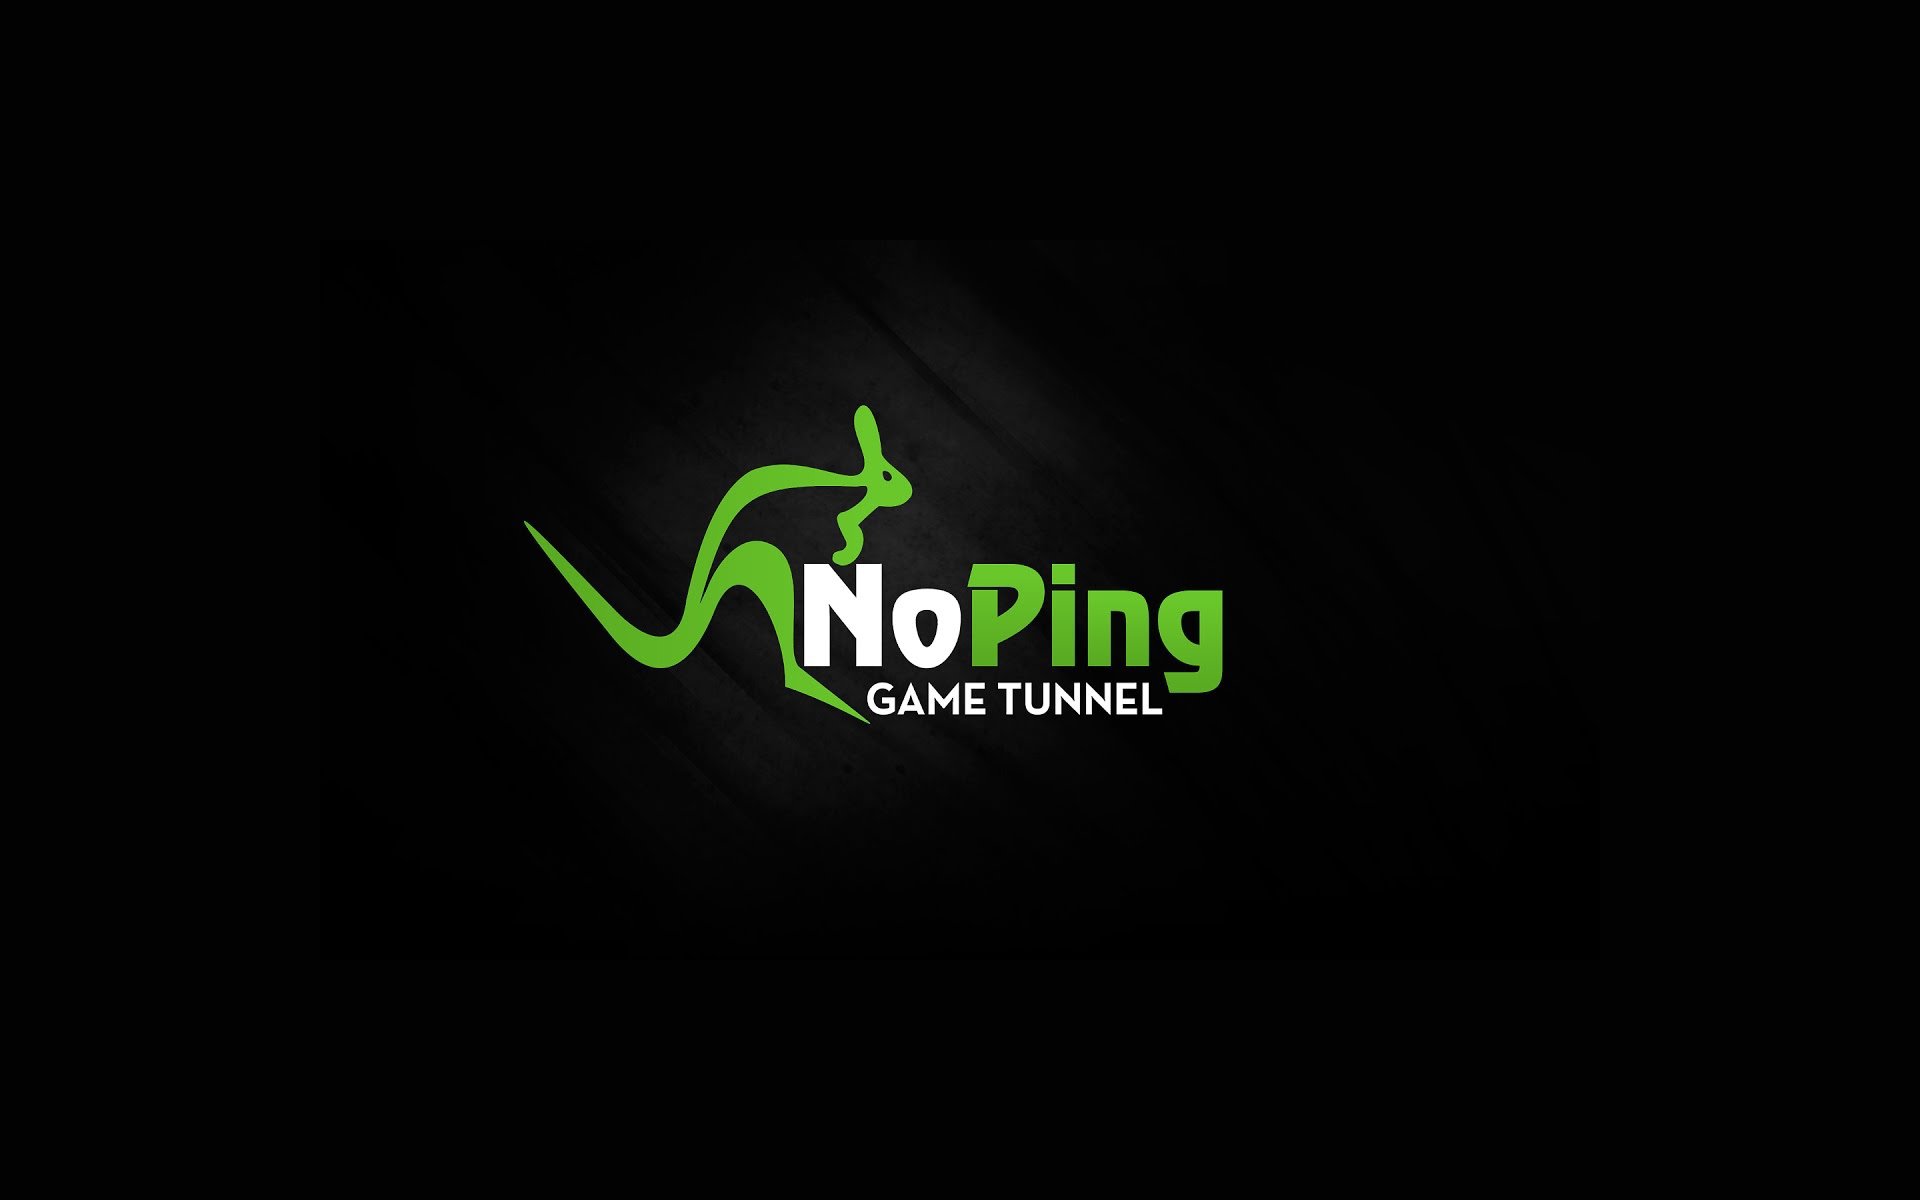 NoPing Game Tunnel